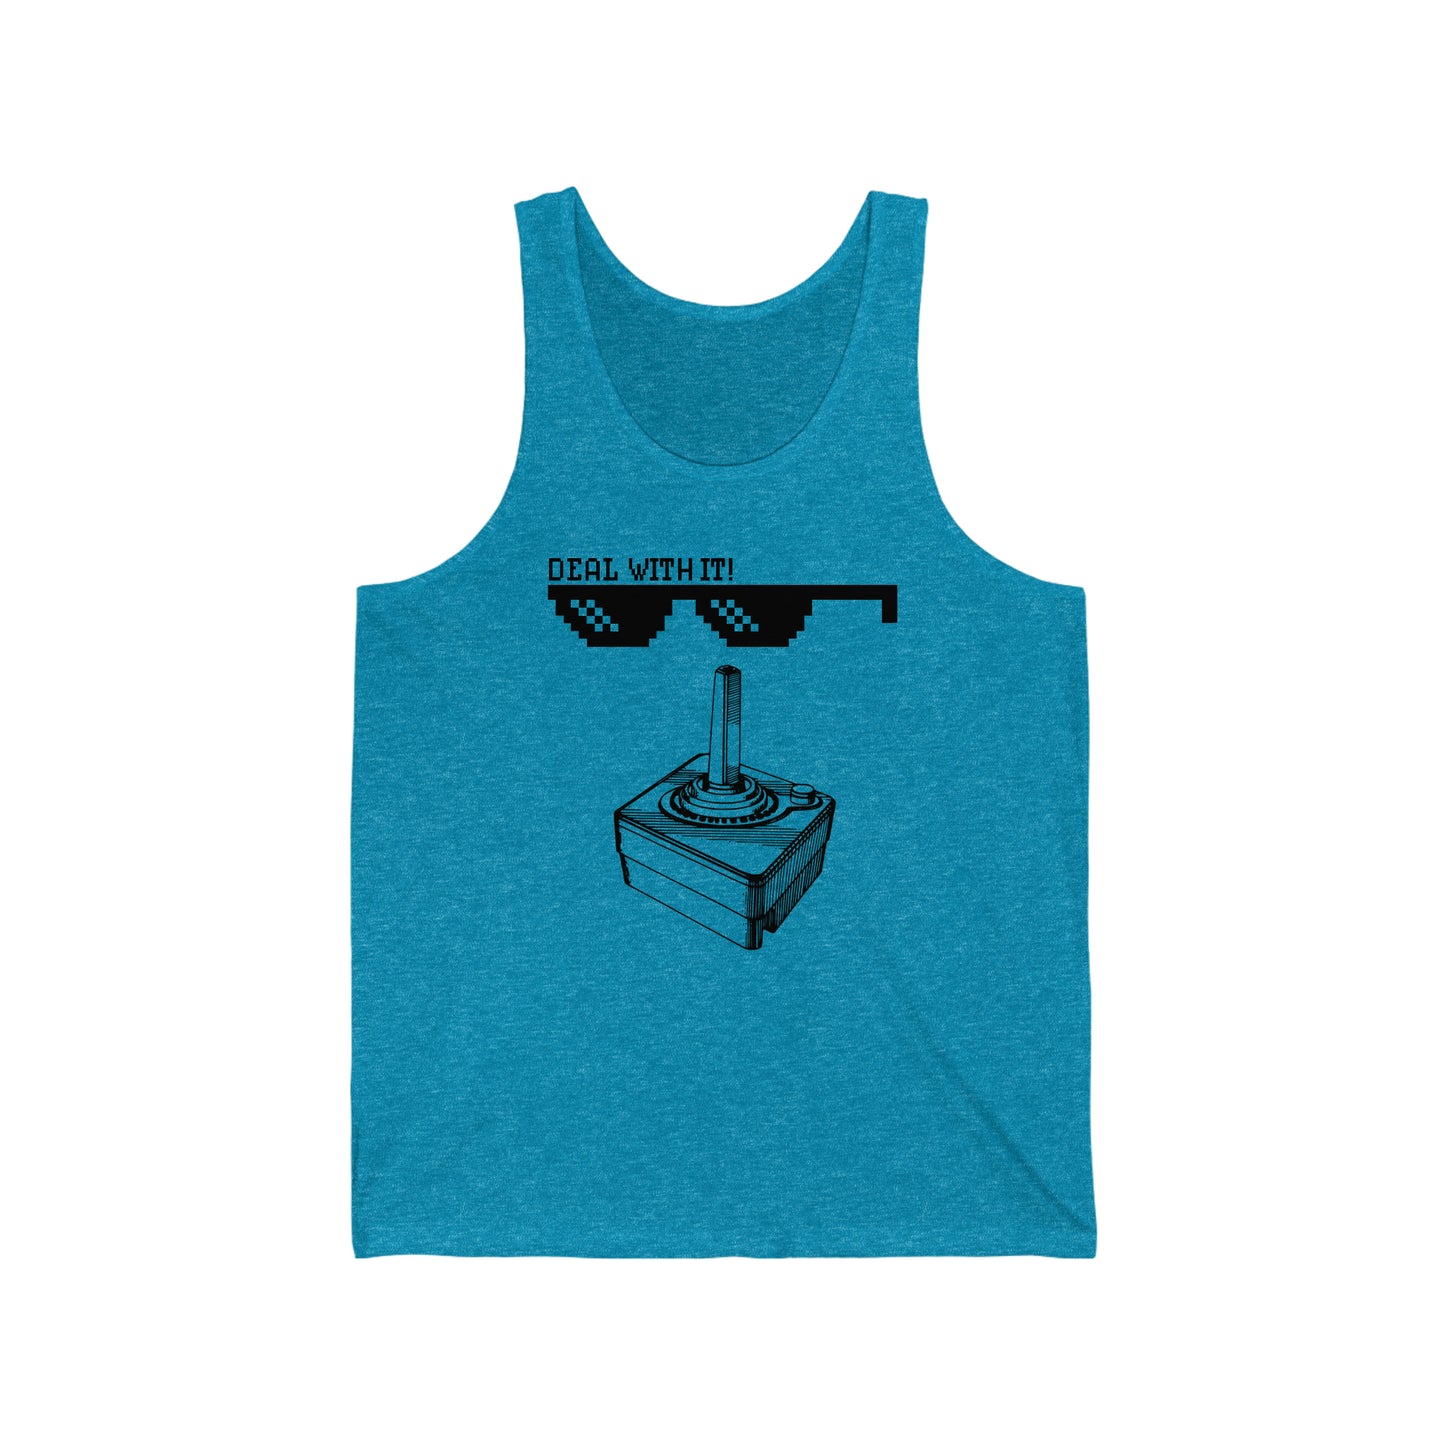 Deal With It! Retro Style Unisex Tank Top